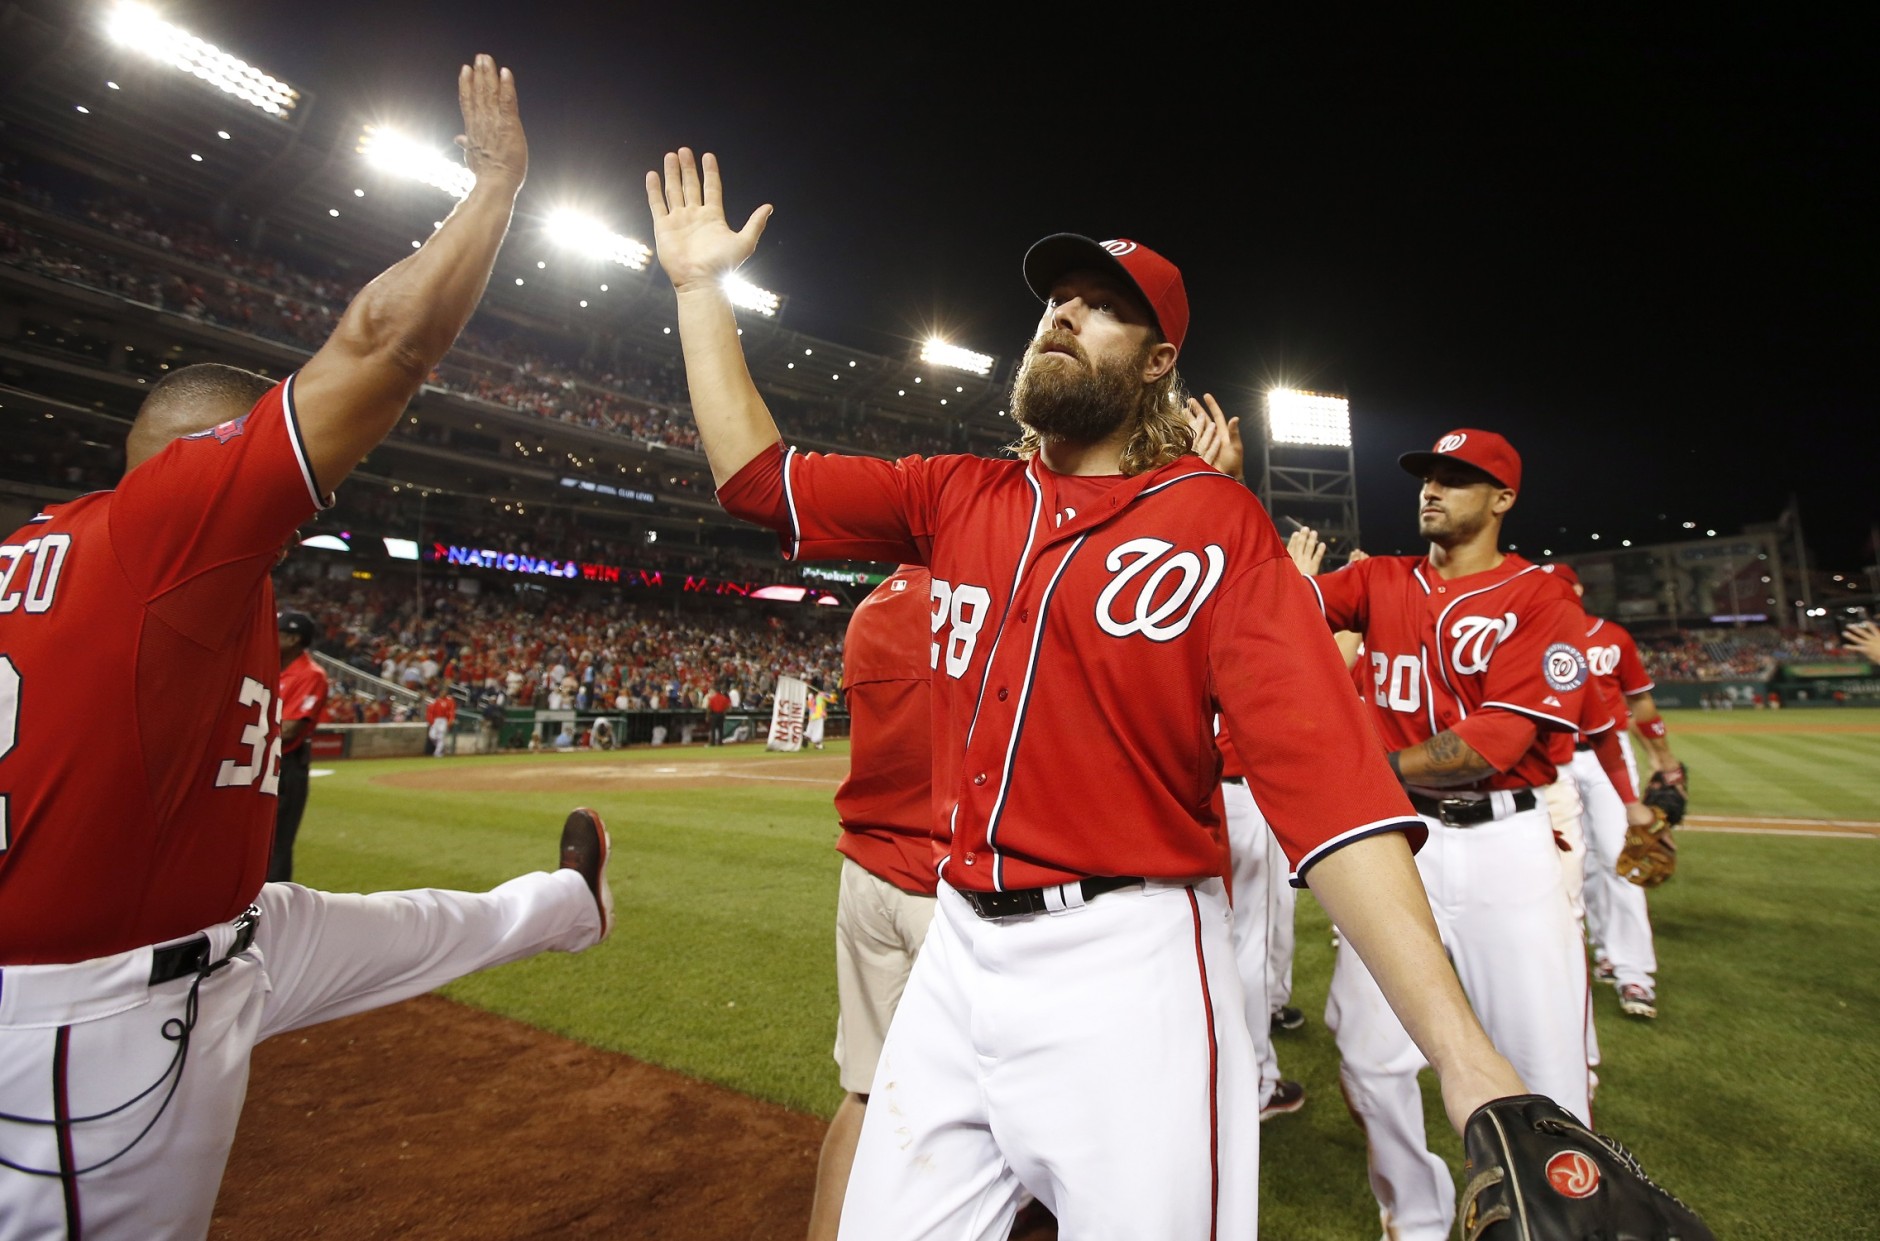 Washington Nationals left fielder Jayson Werth (28) and others celebrate after a baseball game against the Miami Marlins at Nationals Park, Saturday, Aug. 29, 2015, in Washington.  The Nationals won 5-1. (AP Photo/Alex Brandon)